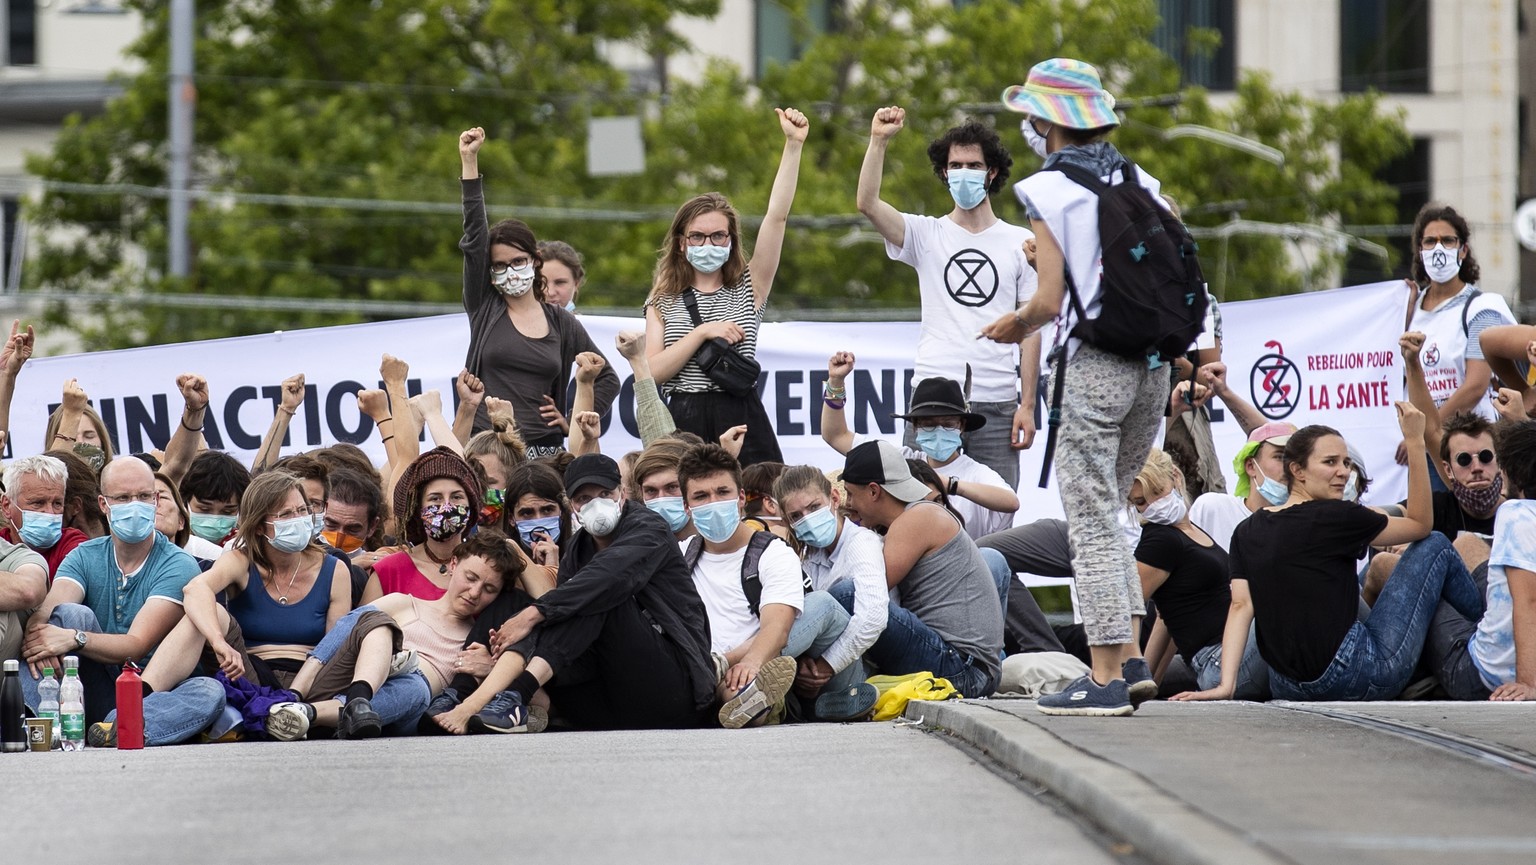 Activists from the global environmental movement Extinction Rebellion during a protest on the Quaibruecke in Zurich, Switzerland, Saturday, June 20, 2020. (KEYSTONE/Alexandra Wey)